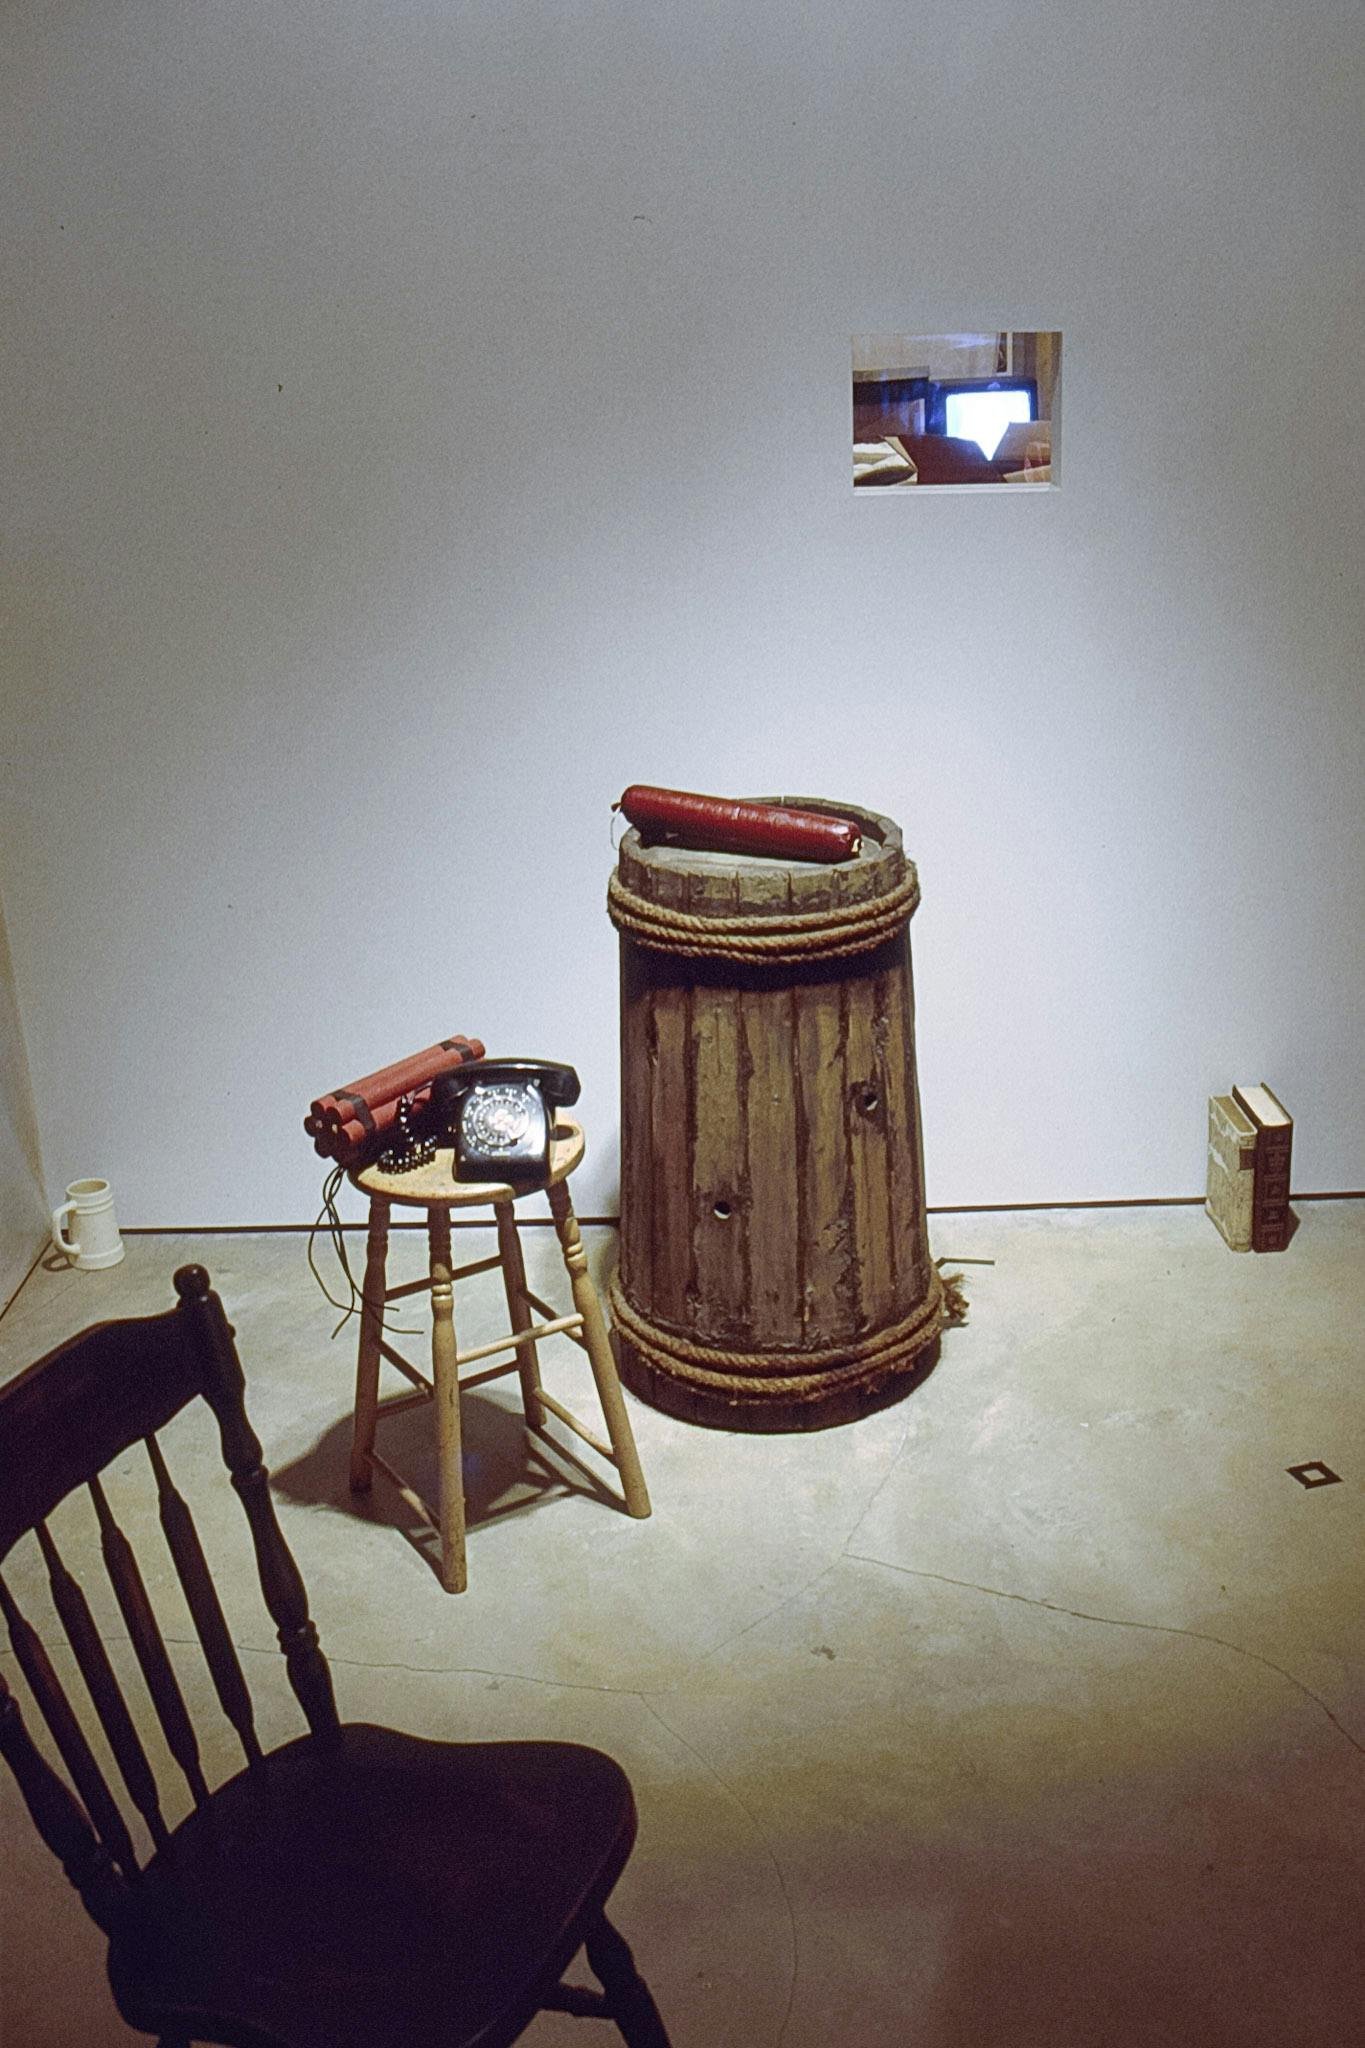 A wooden skinny barrel, stool, chair, two books, and a ceramic coffee mug are placed on the gallery floor. A black dial phone and a dynamite bundle are placed on top of the stool. 